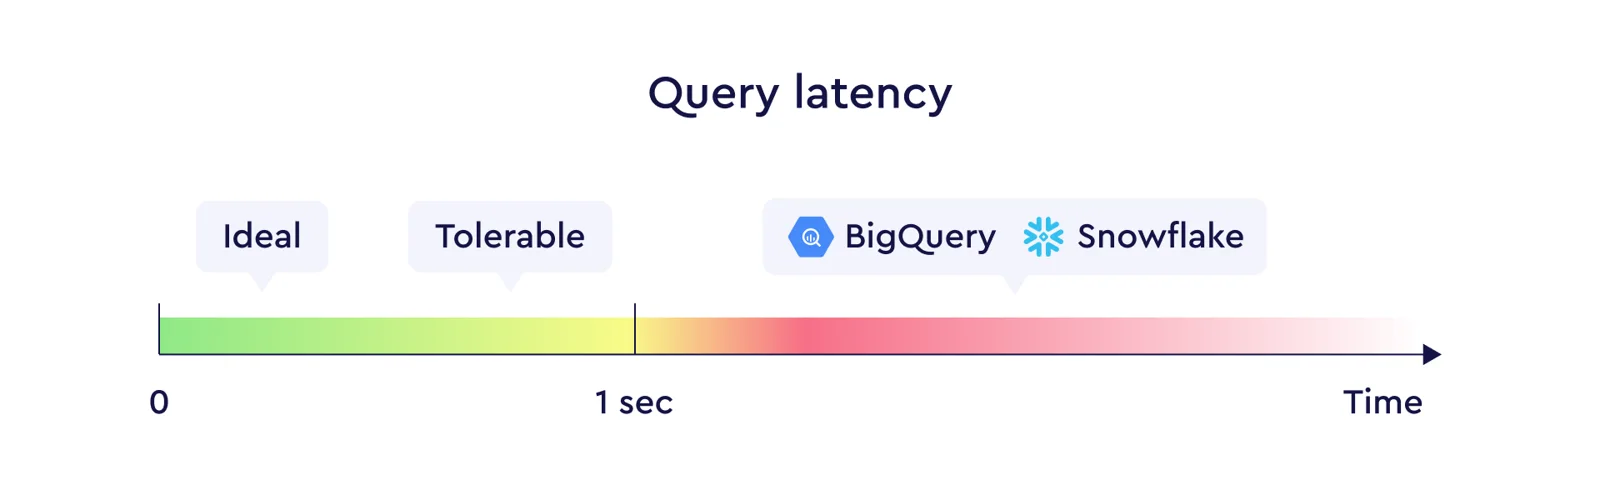 query-latency-03.png